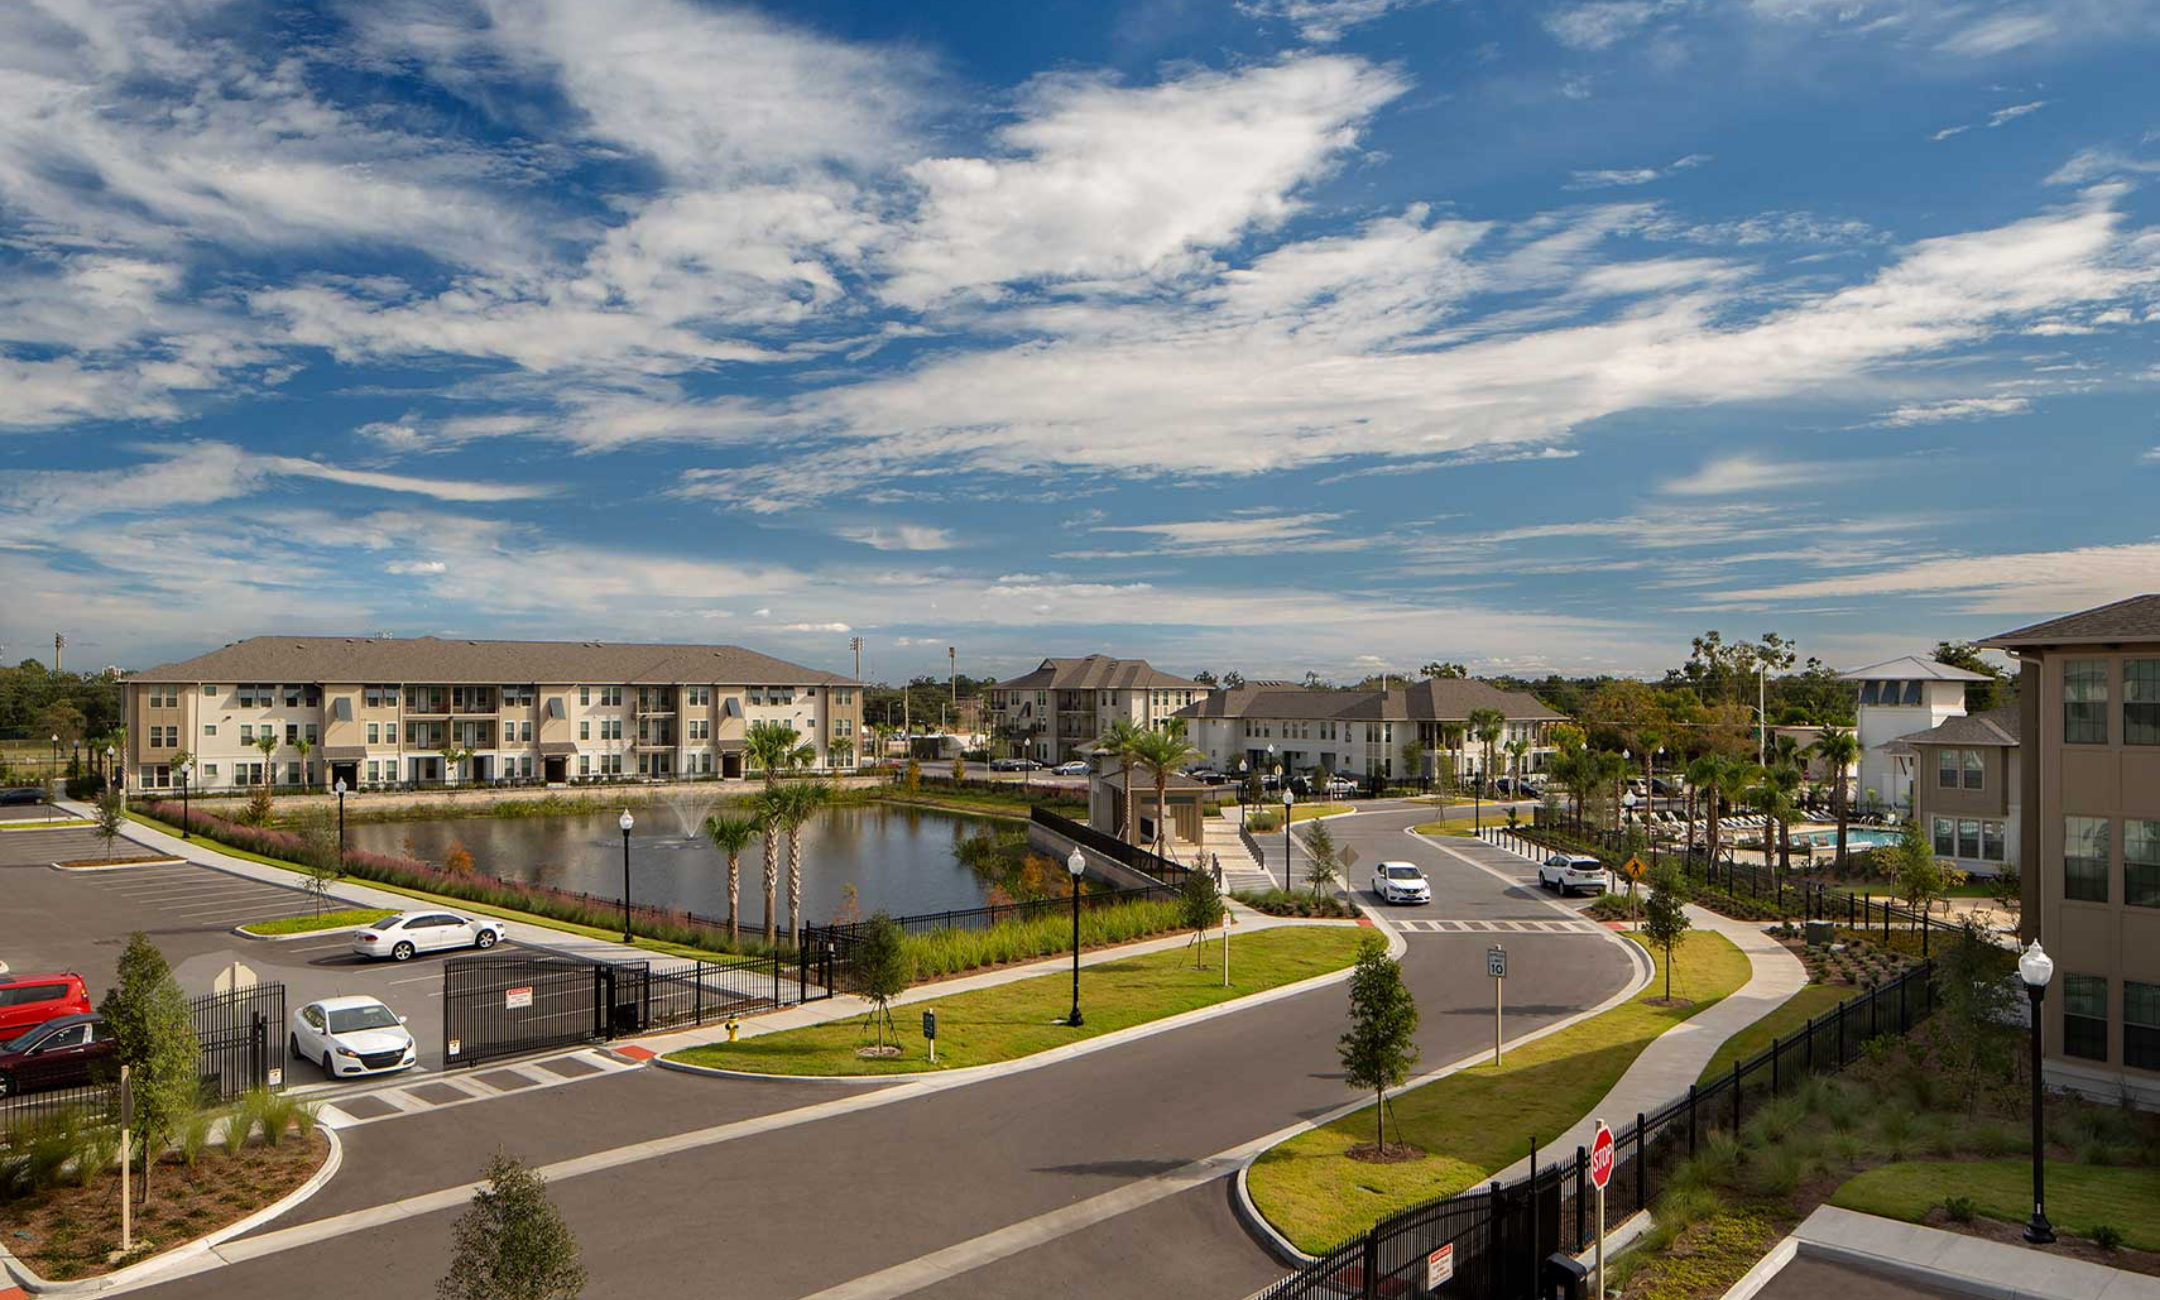 Pendana at West Lakes, a housing community created by the nonprofit Lift Orlando and Columbia Residential, with support from Truist and other businesses